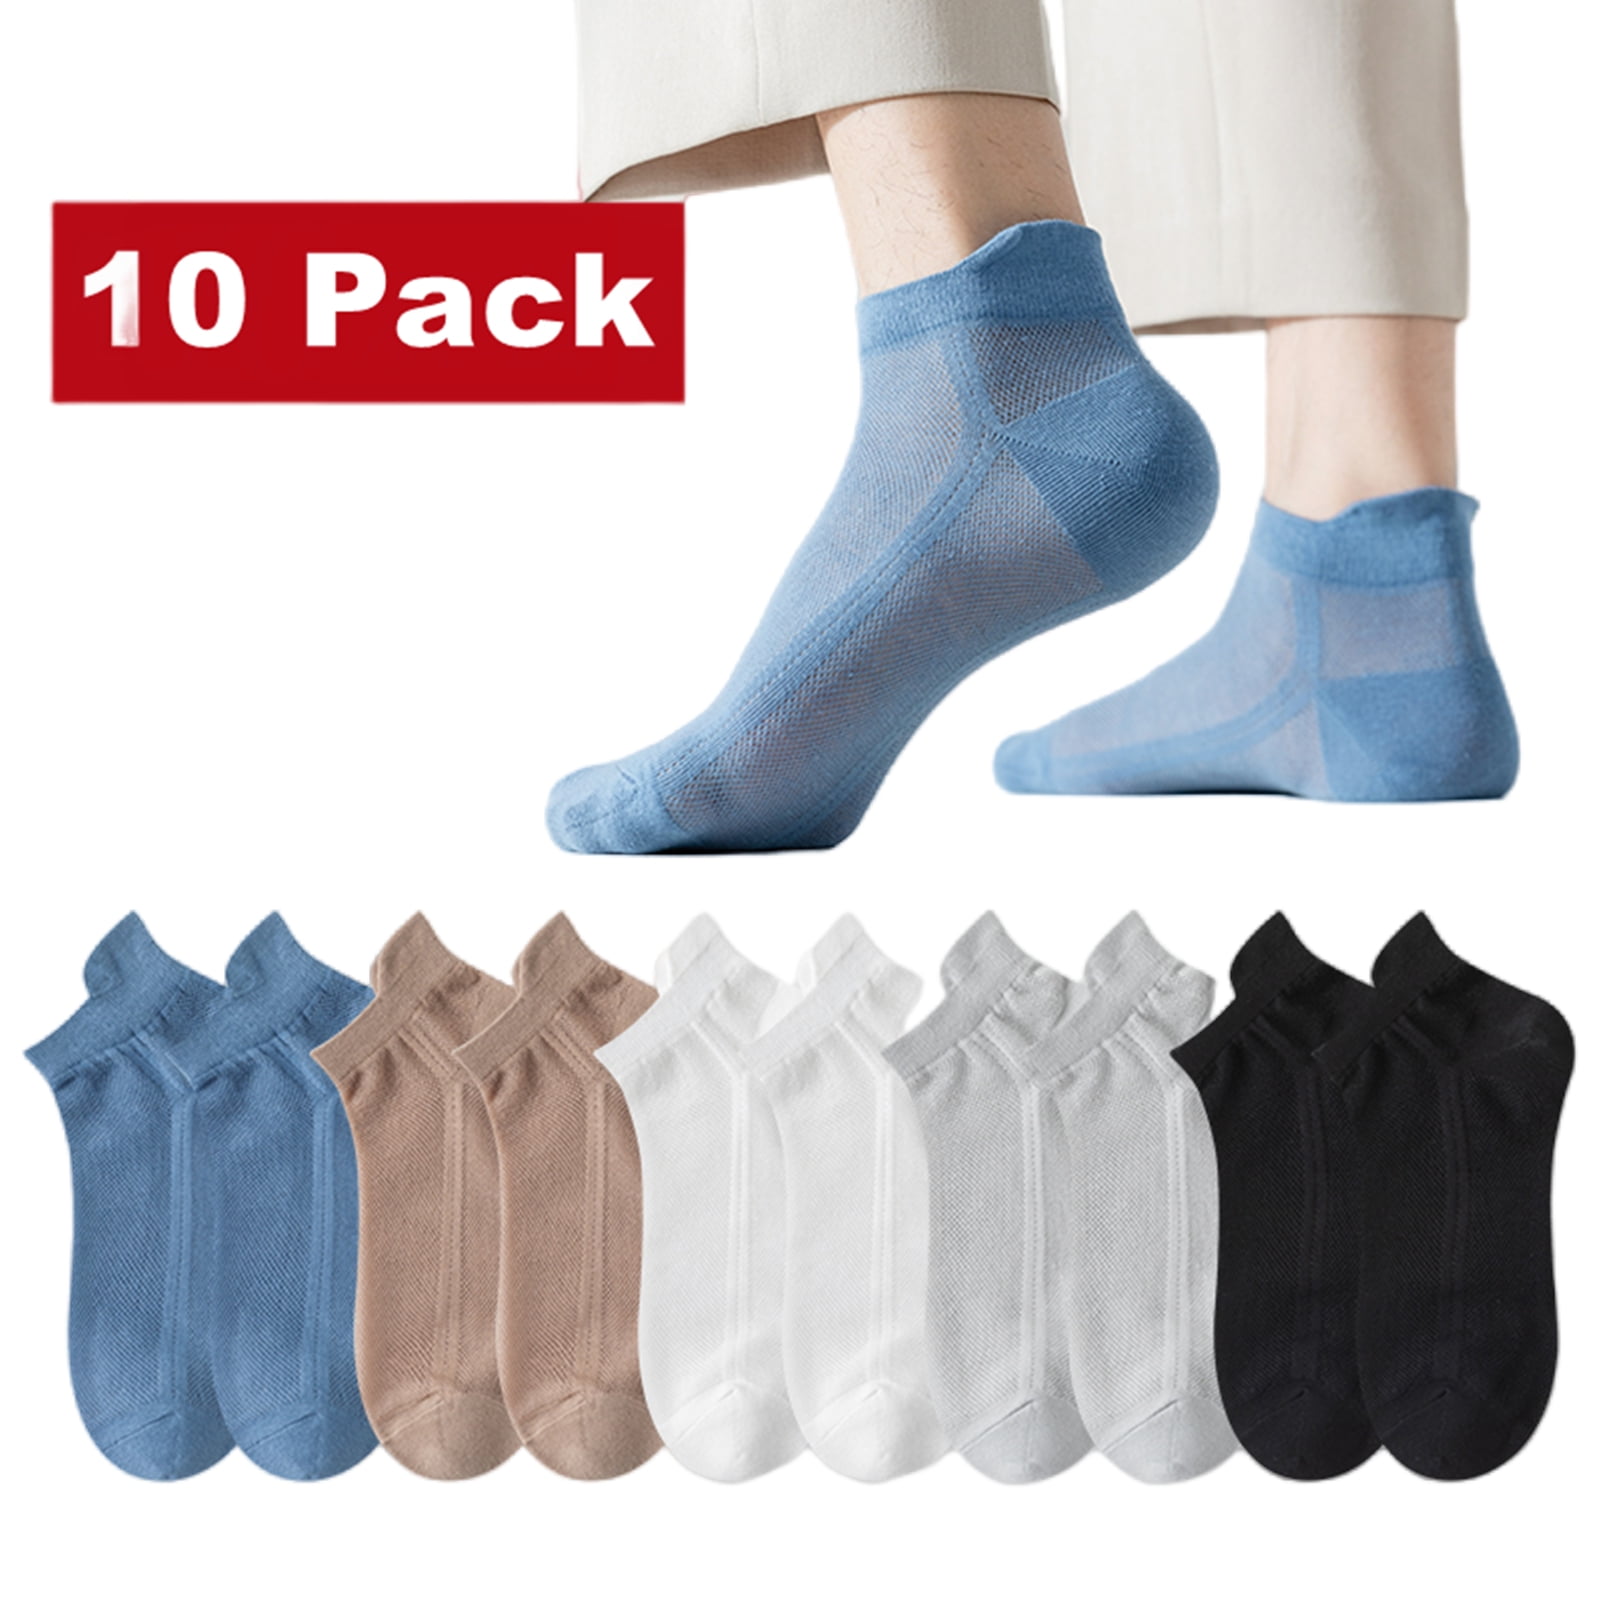 Unisex Ankle Socks Ultra Thin Breathable Dry Fit Low Cut Running for ...